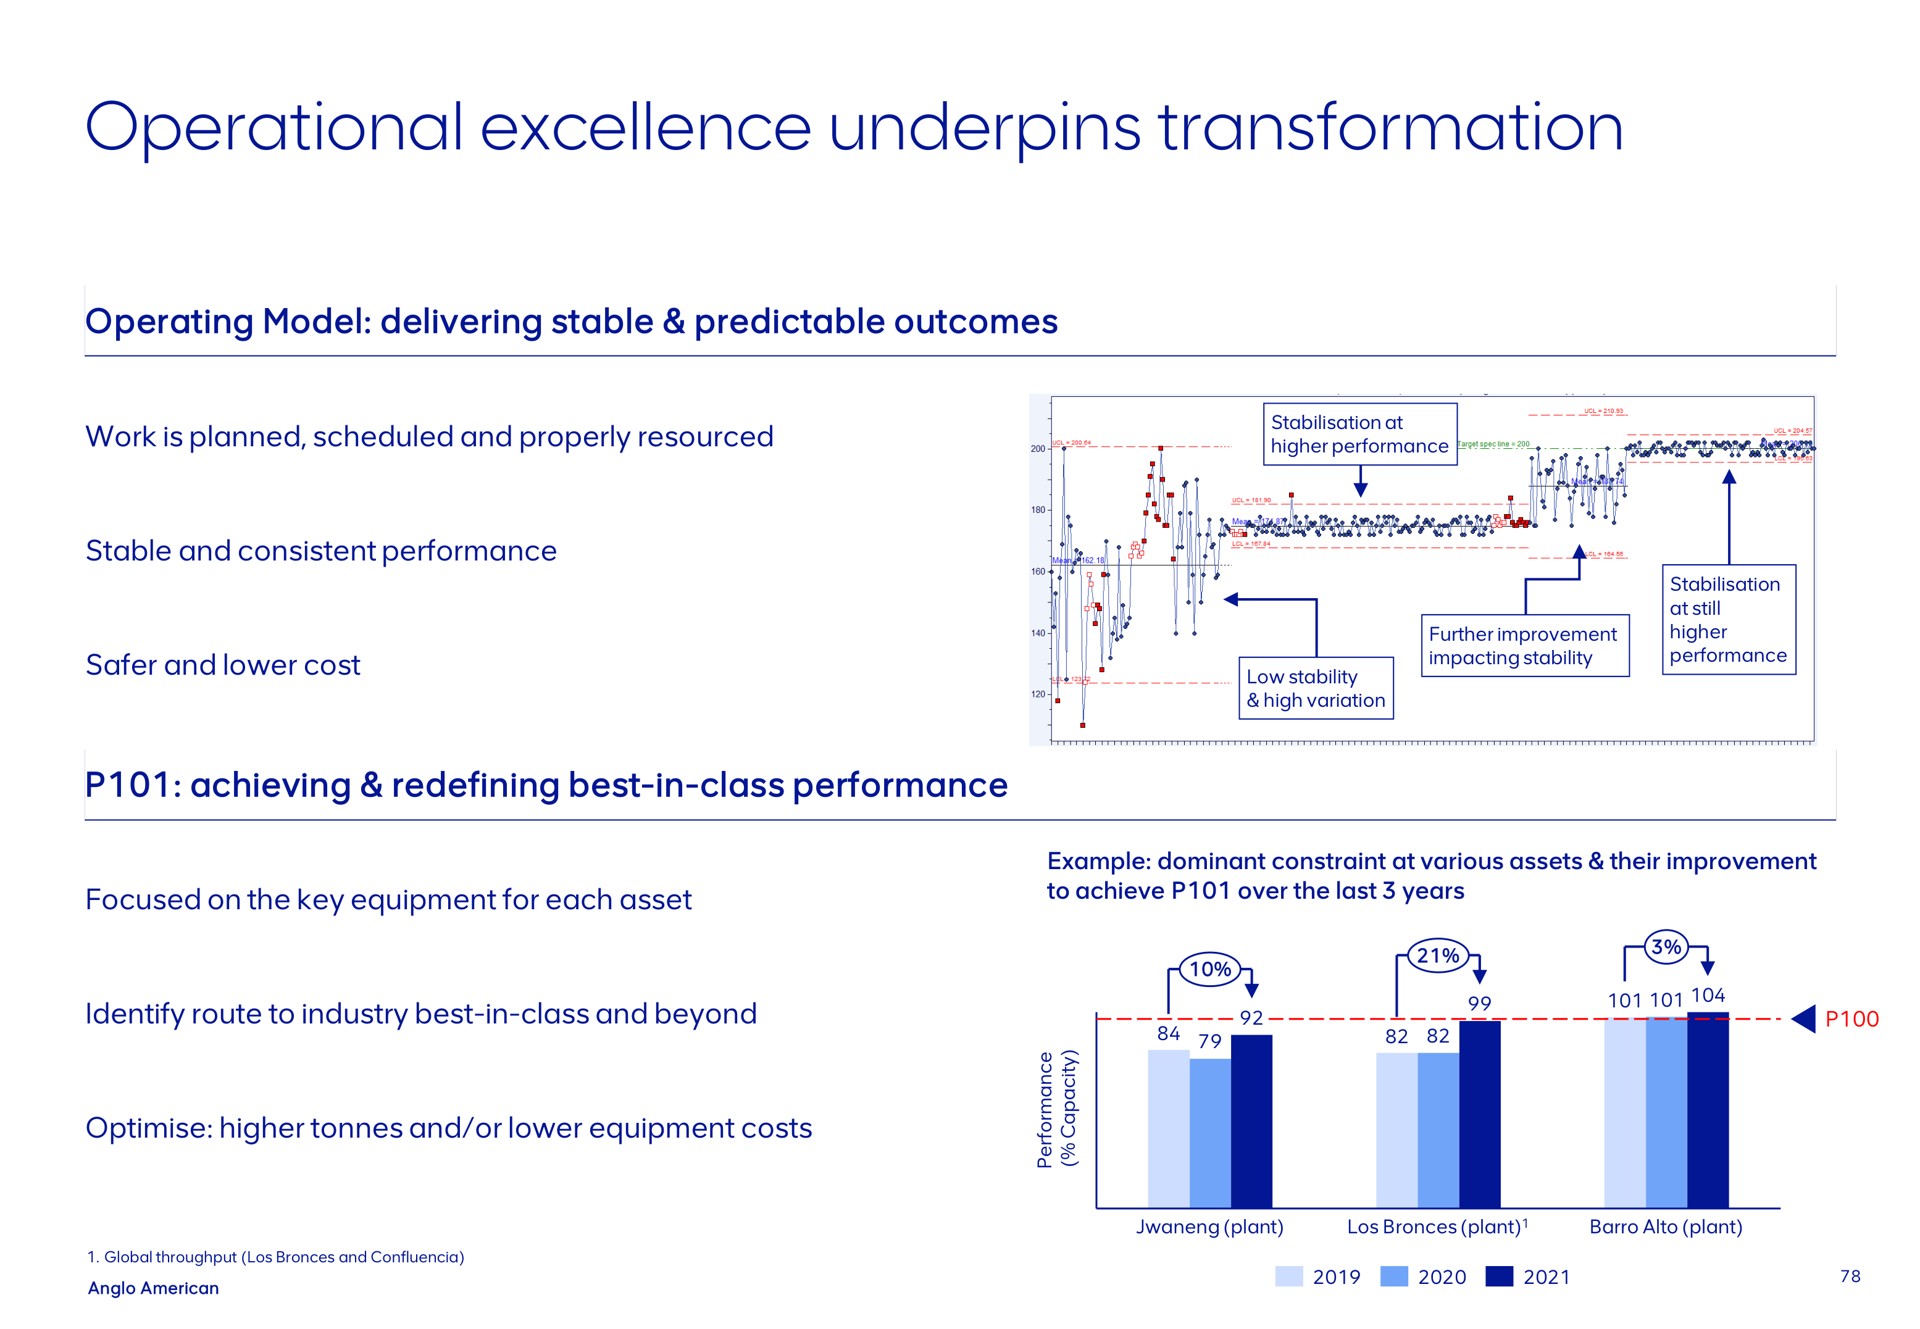 operational excellence underpins transformation operating model delivering stable predictable outcomes work is planned scheduled and properly stable and consistent performance a and lower cost achieving redefining best in class performance at higher performance i a further improvement impacting stability at still higher performance low stability high variation focused on the key equipment for each asset example dominant constraint at various assets their improvement to achieve over the last years identify route to industry best in higher and or lower equipment costs a i a a global throughput and plant plant alto plant i | AngloAmerican